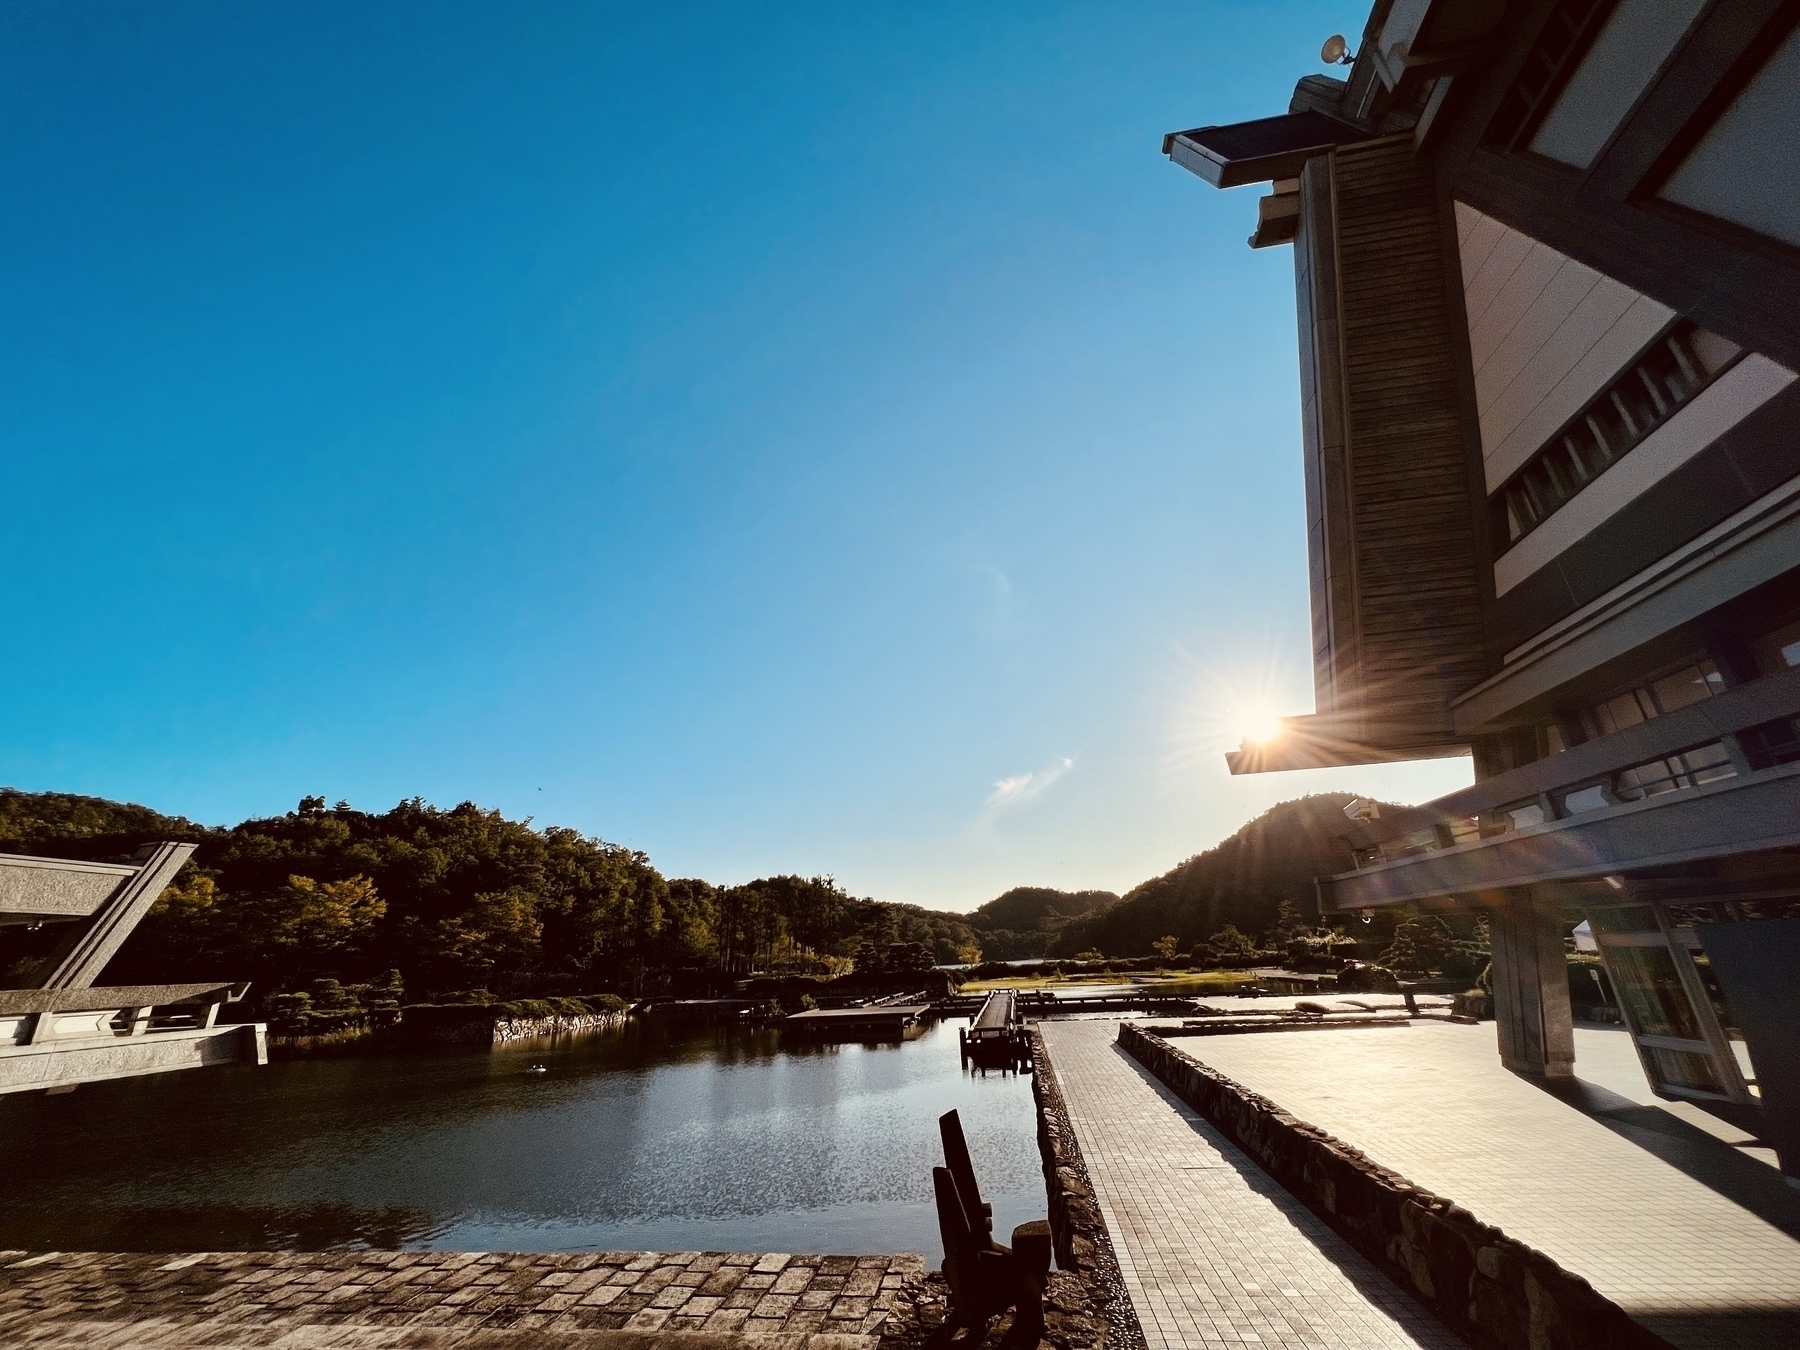 Sun goes low behind a part of the Kyoto International building next to the pond on a clear day